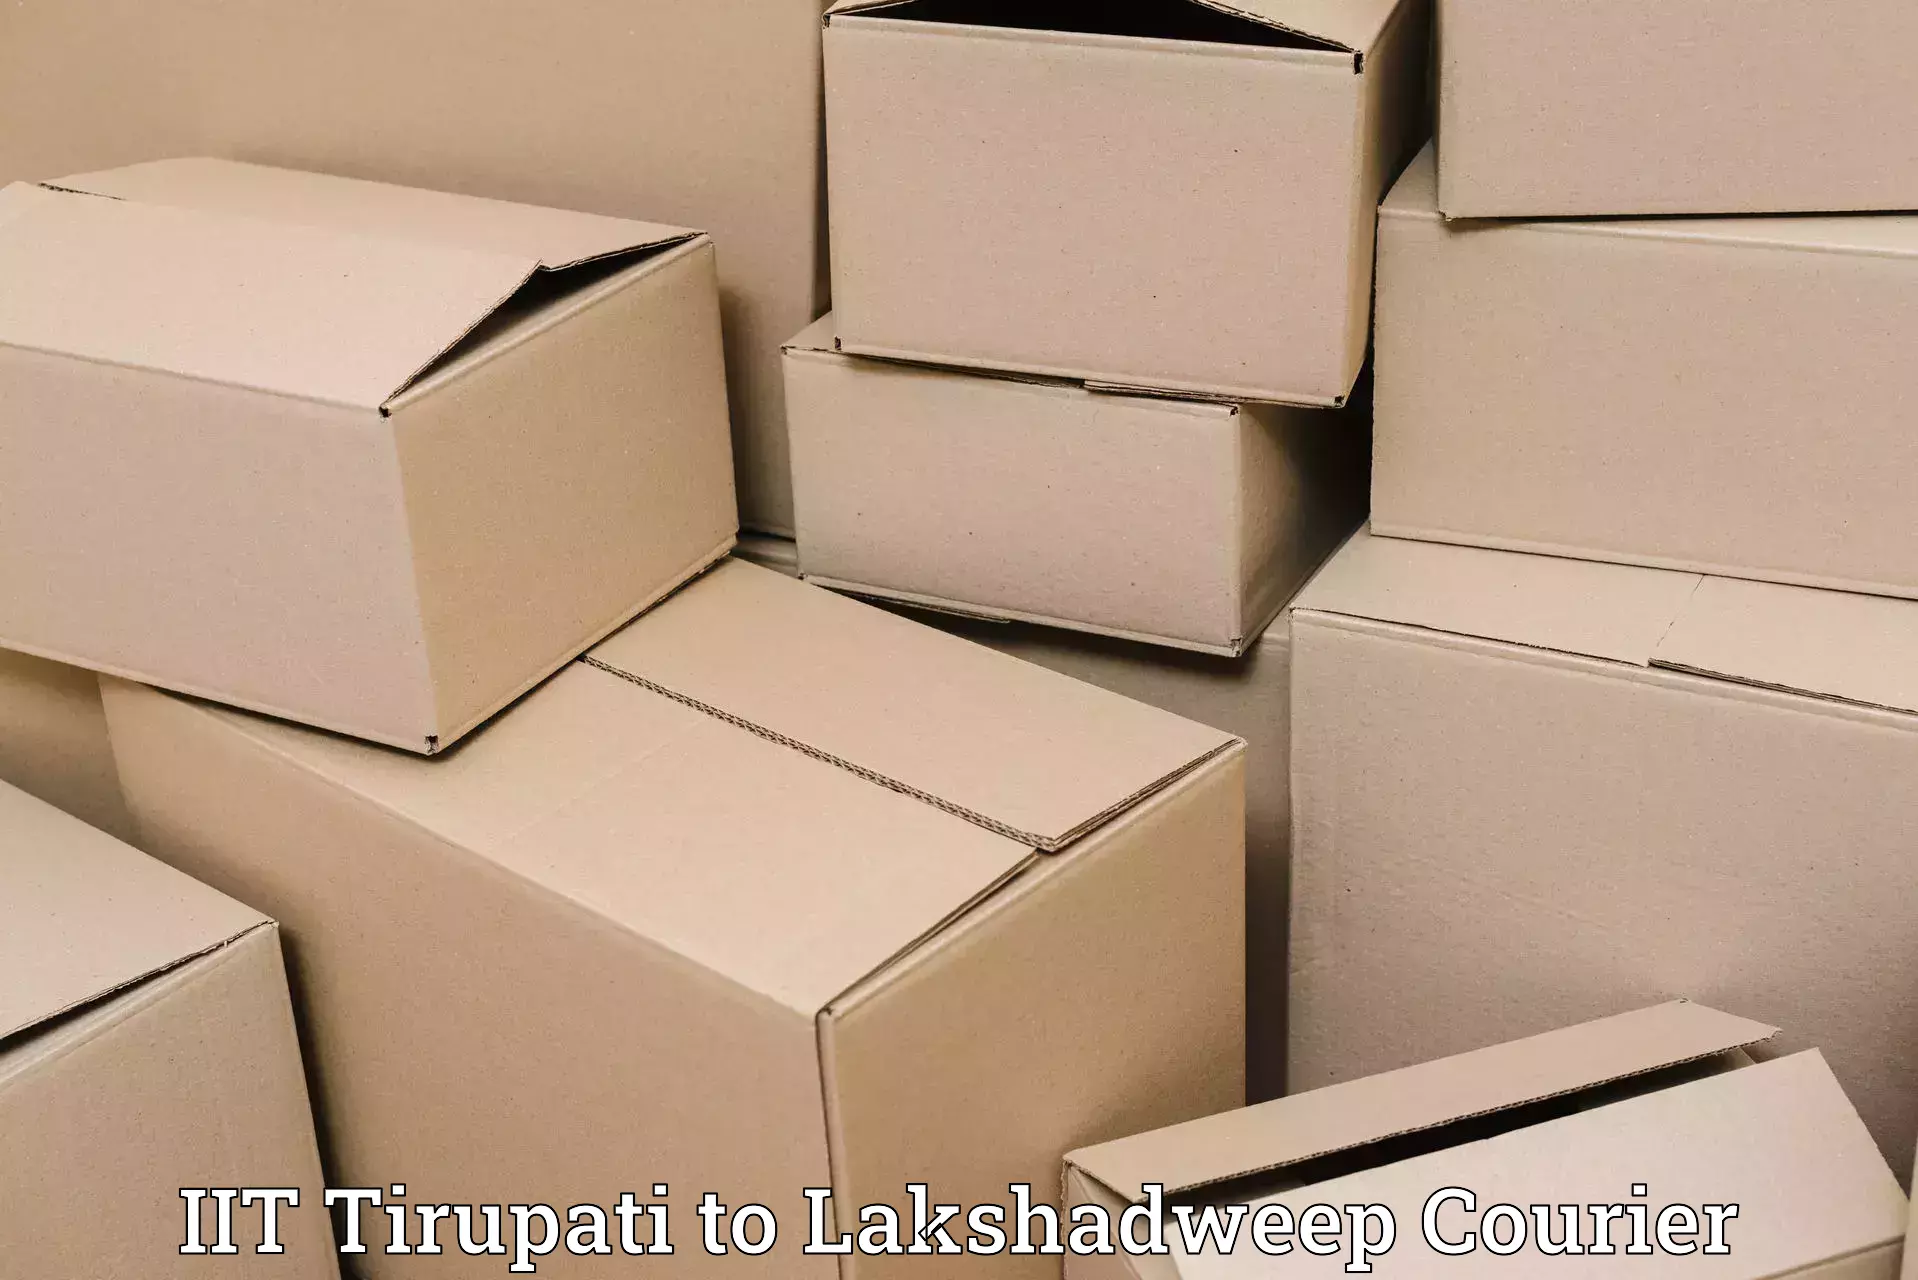 Next-day delivery options IIT Tirupati to Lakshadweep